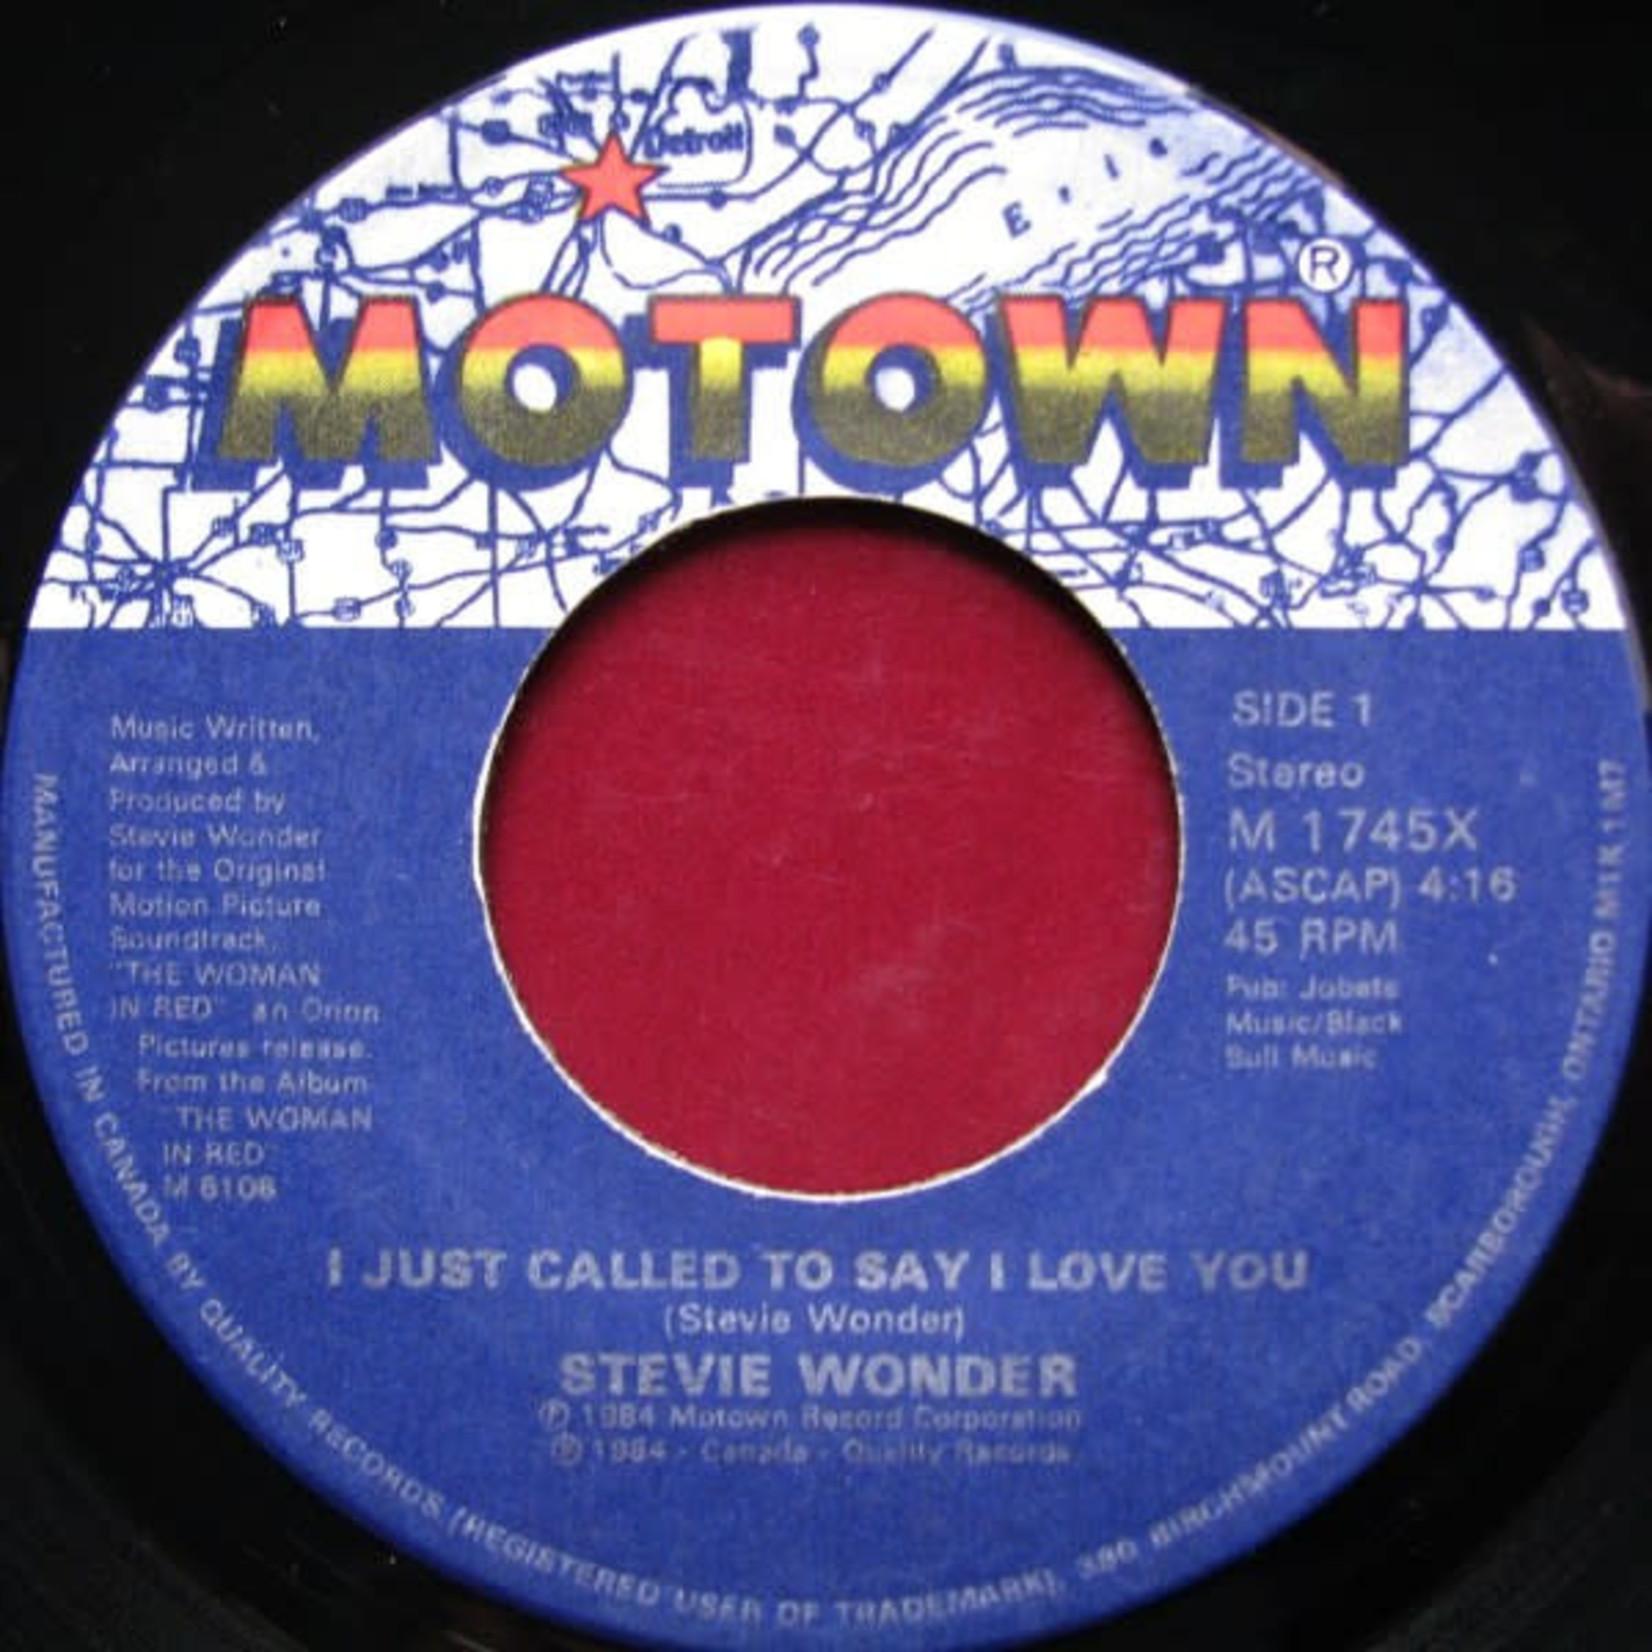 [7"] Stevie Wonder - I Just Called To Say I Love You b/w Instrumental (7")